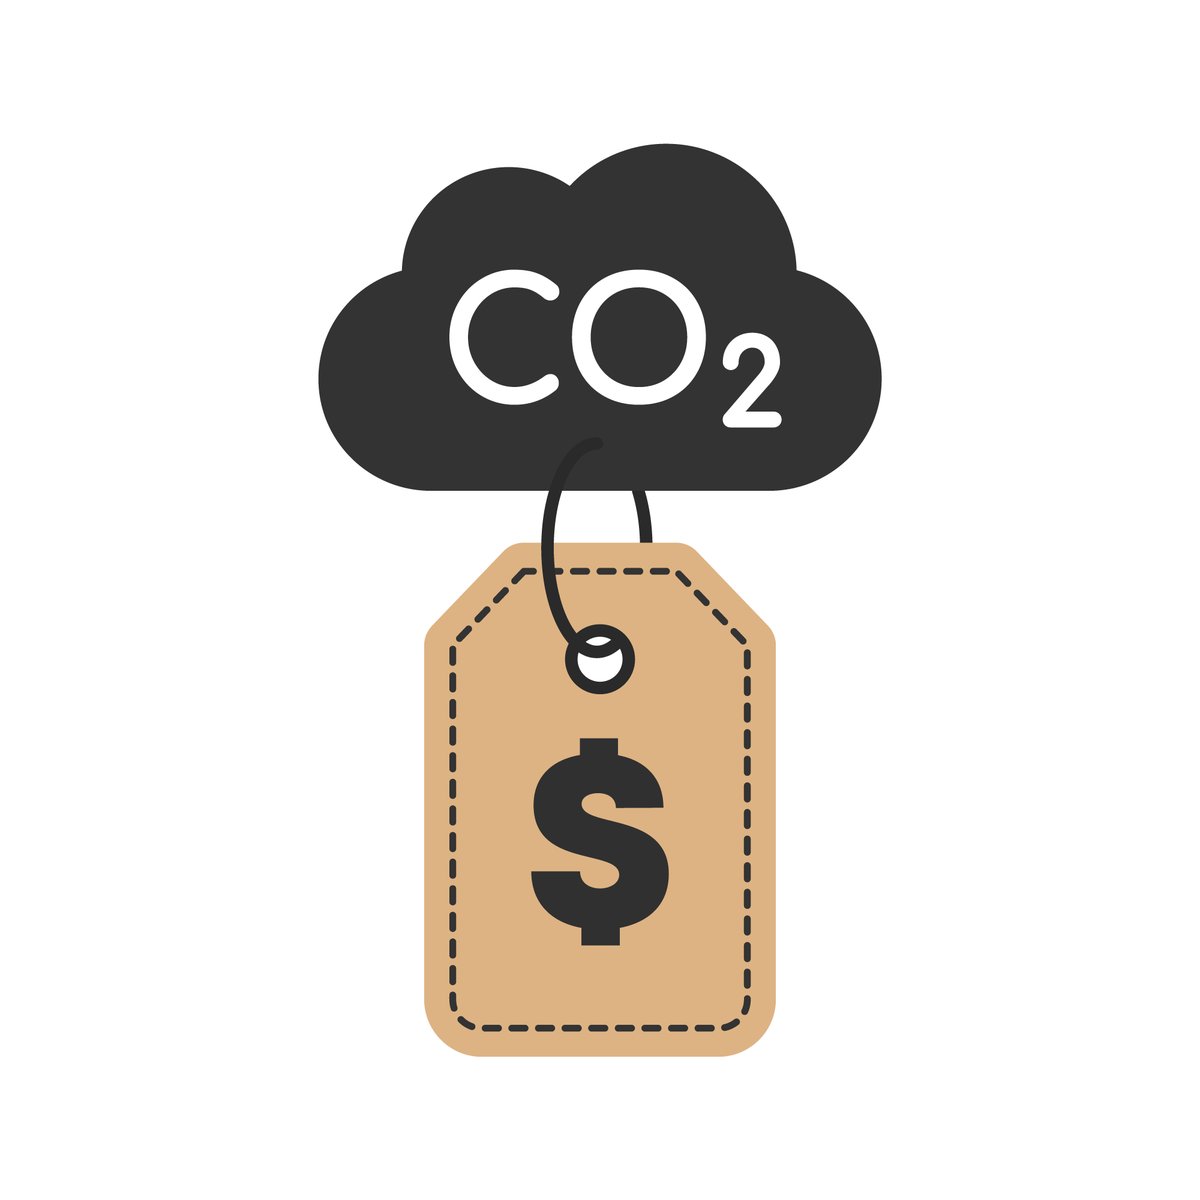 Join us for the Multilateral Cooperation and Carbon Taxation online conference, 14 March @ 3.30pm (UK time), which aims to shed light on the opportunities and limits that could arise from the adoption of a global minimum carbon tax and/or CBAMS. oxfordtax.sbs.ox.ac.uk/event/multilat…